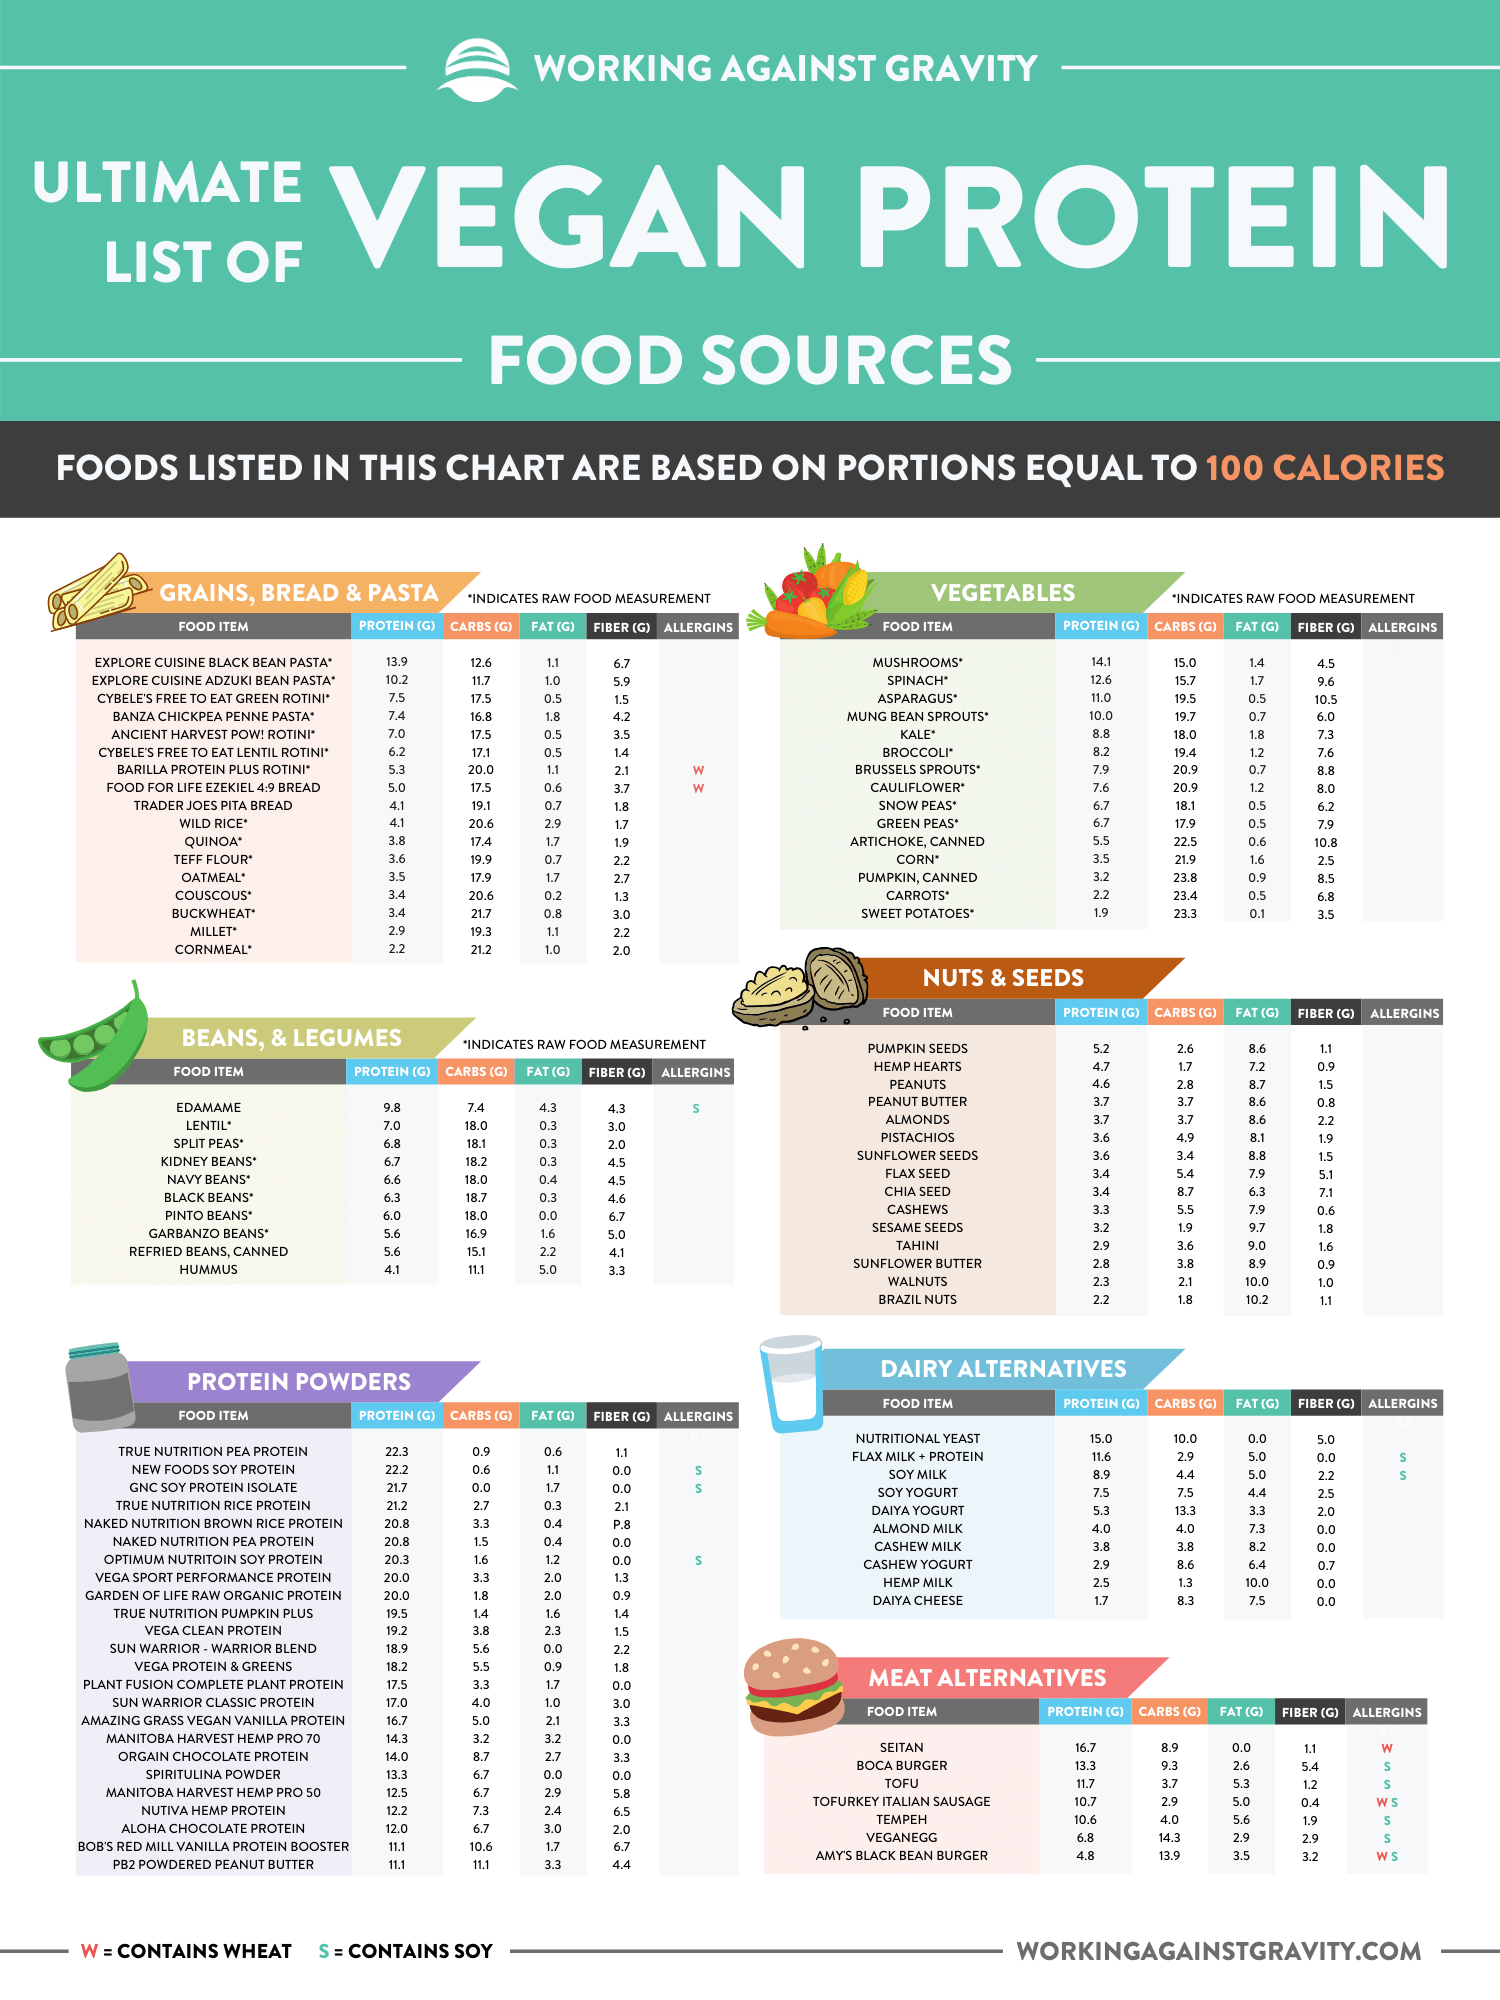 Vegan Protein Sources - Working Against Gravity